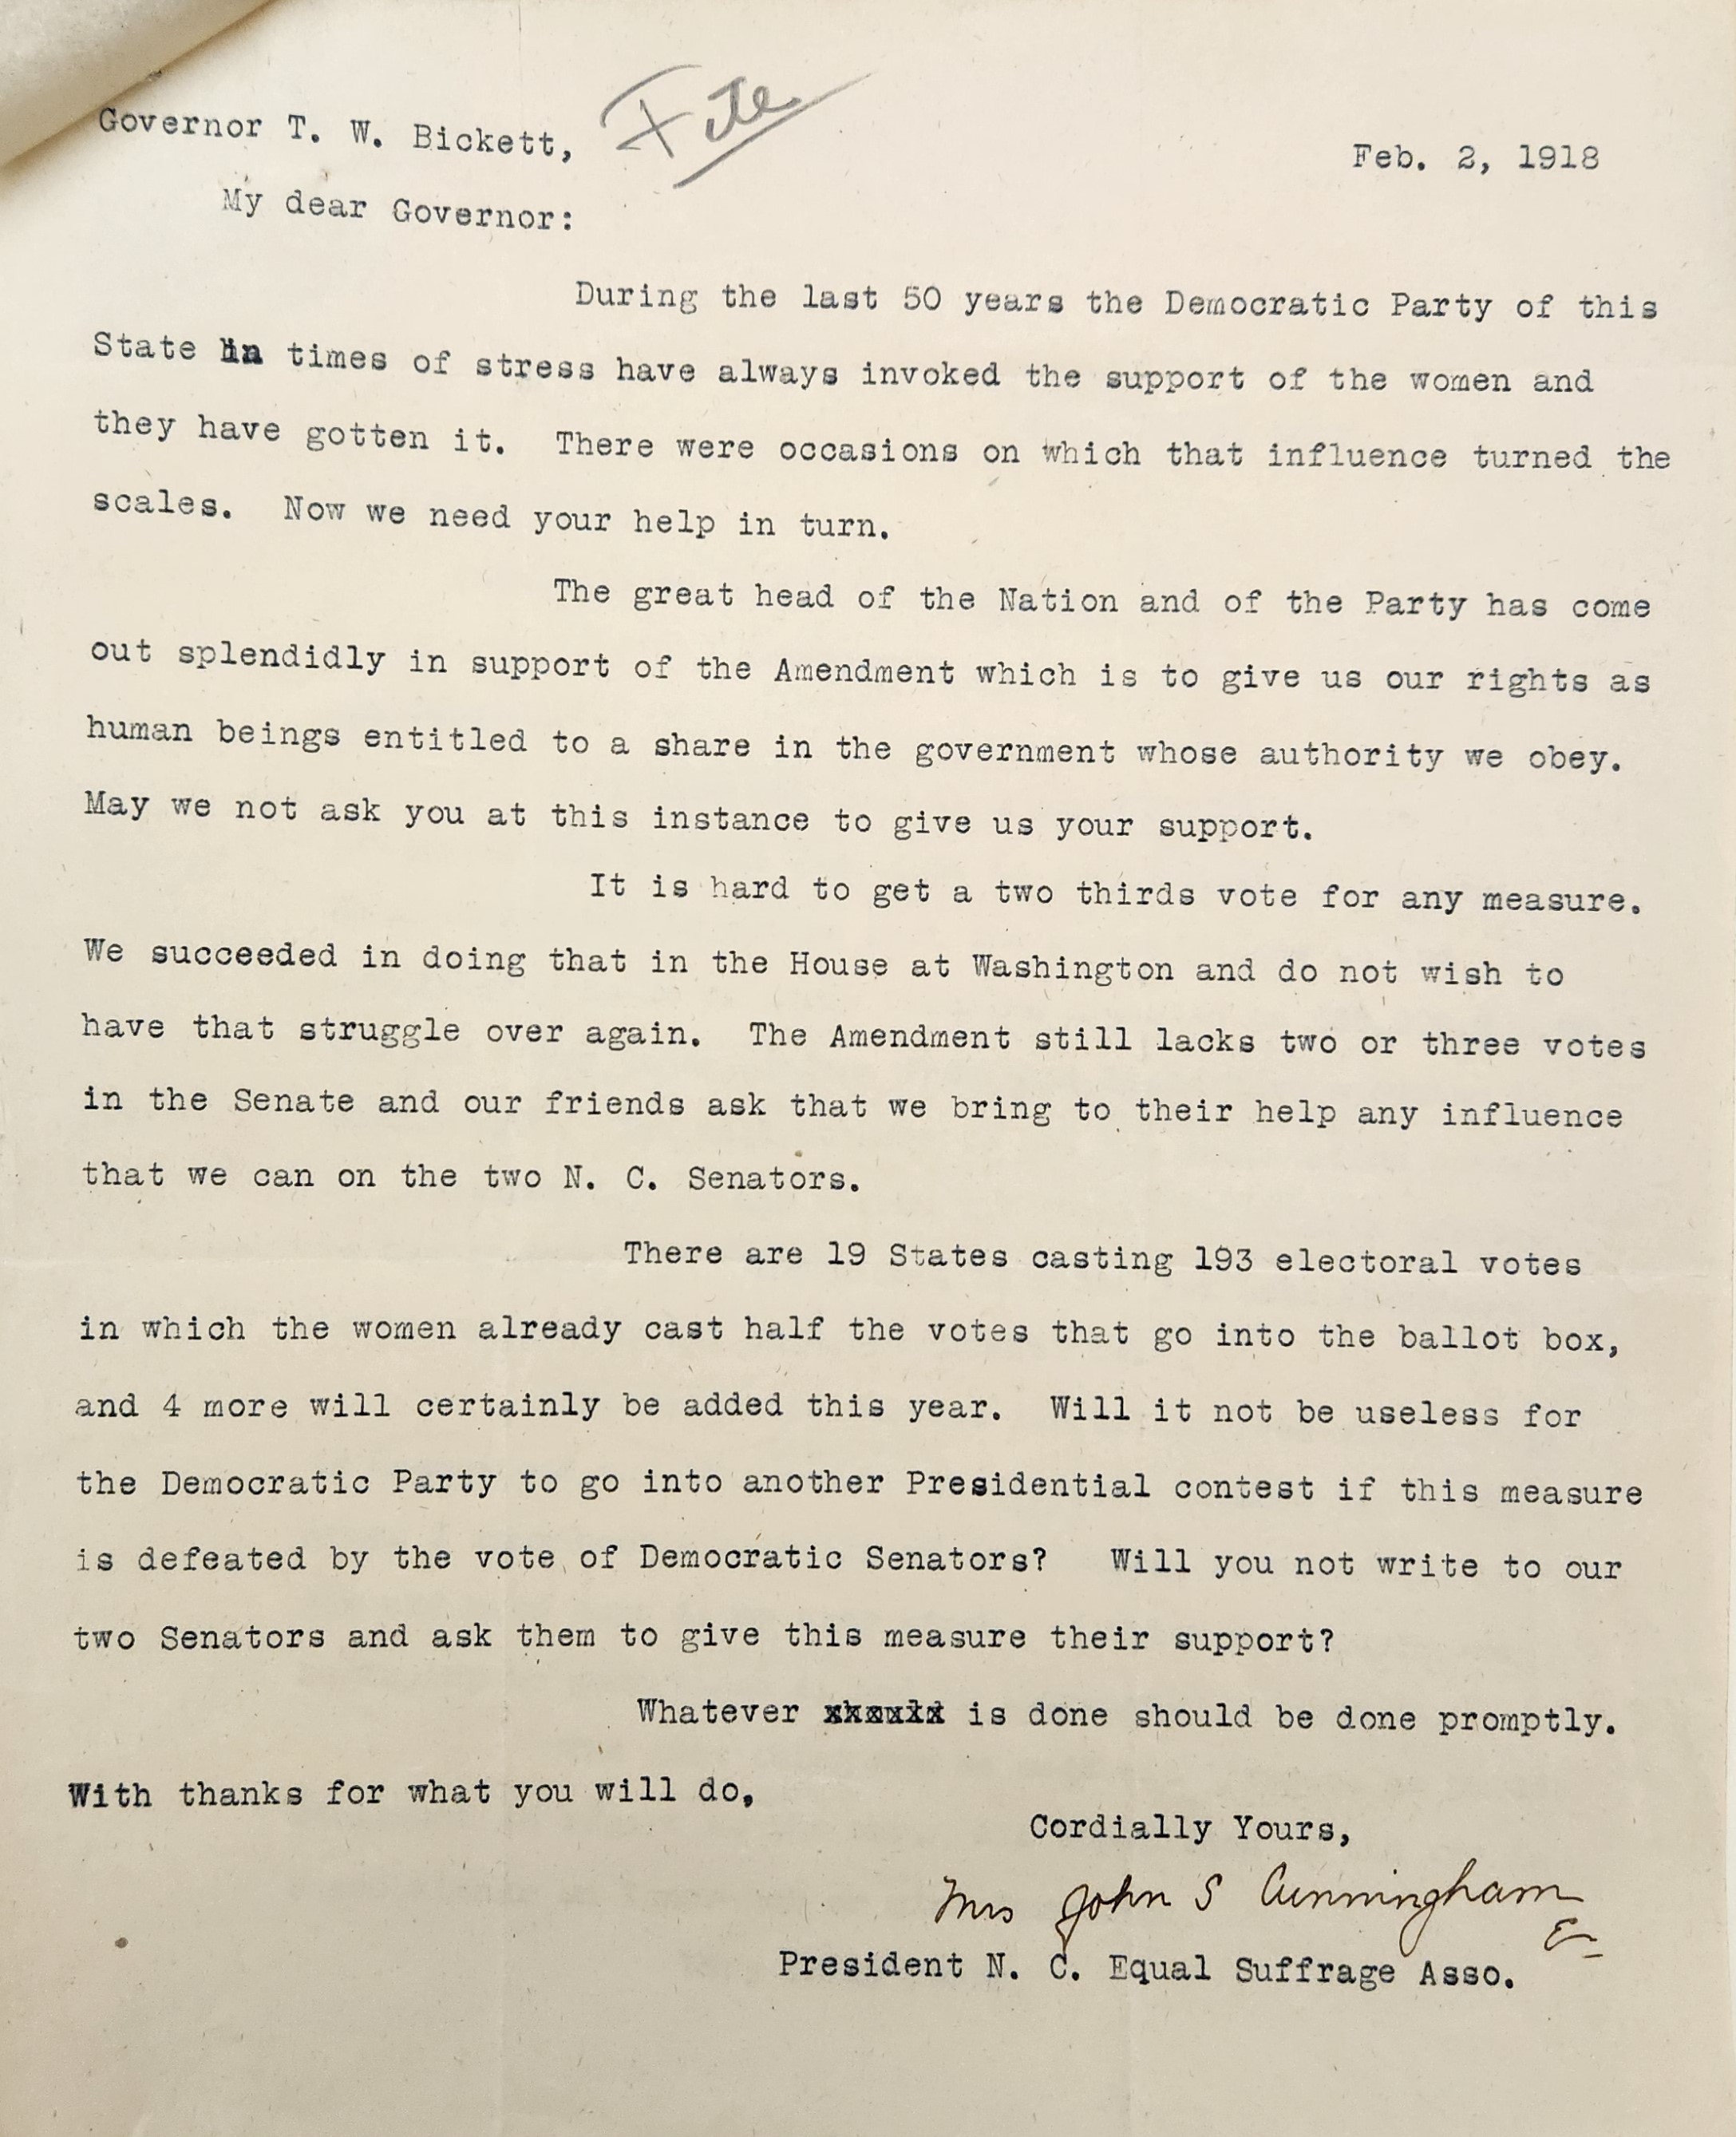 Letter from Cuningham to Bickett, February 2, 1918